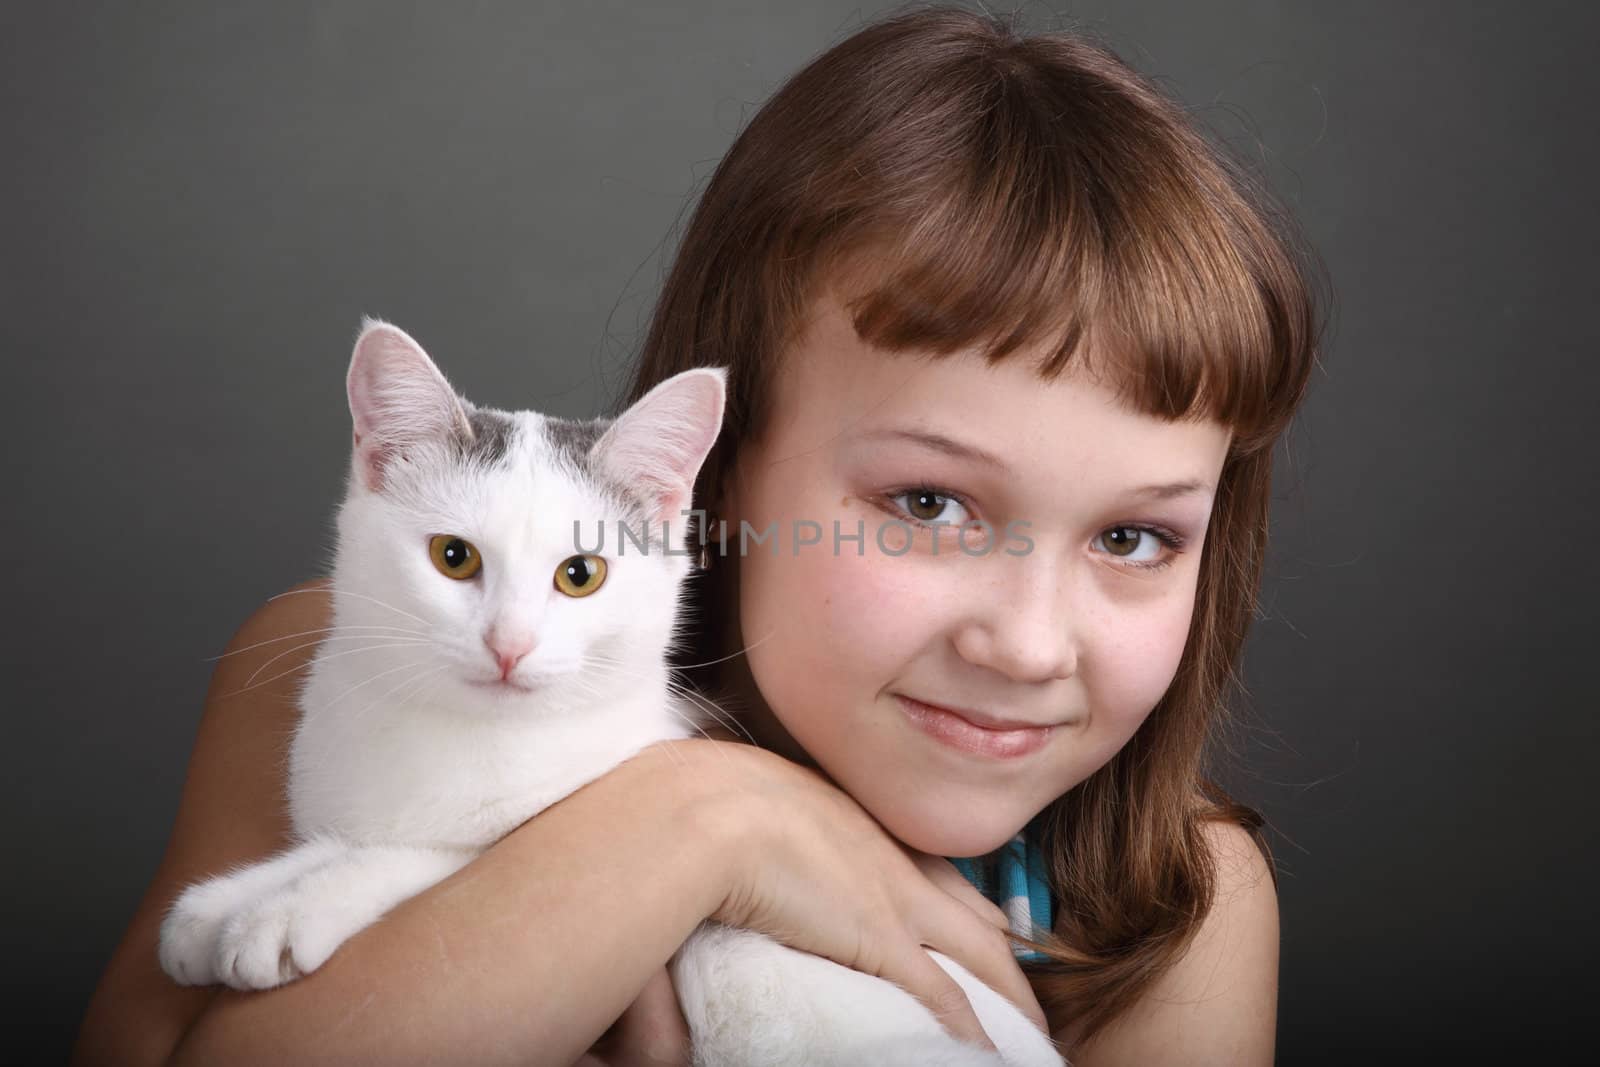 the girl and white cat play. close up. double 12